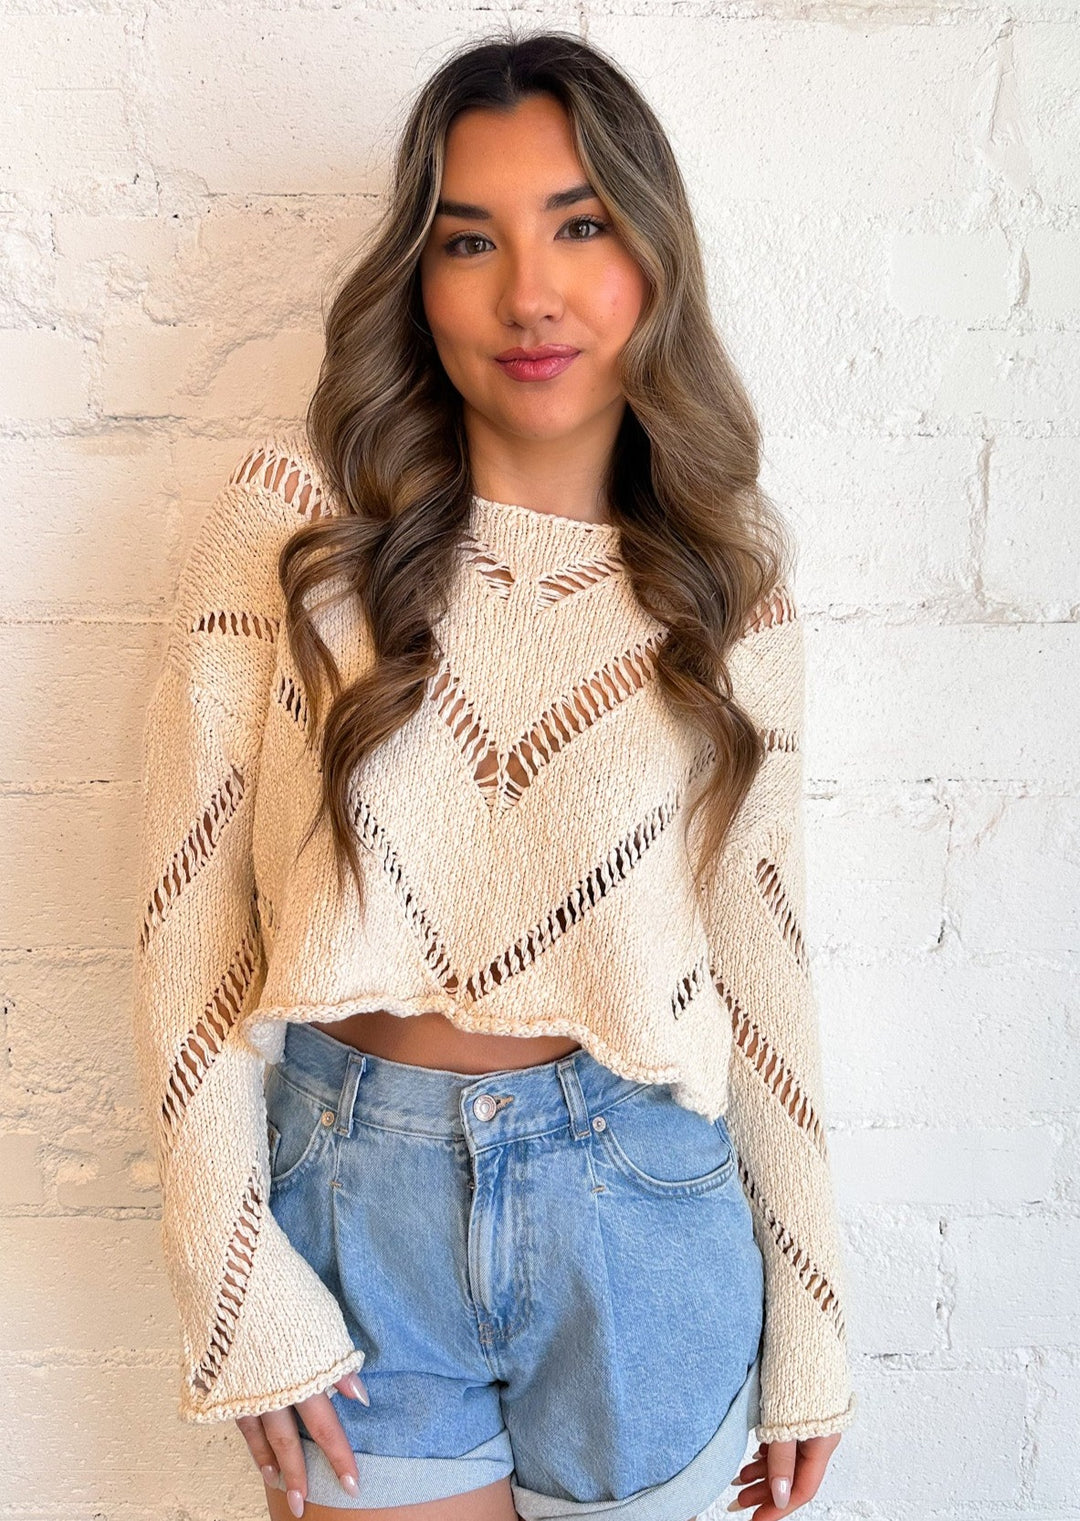 Free People Hayley Sweater, Sweaters, Free People, Adeline, dallas boutique, dallas texas, texas boutique, women's boutique dallas, adeline boutique, dallas boutique, trendy boutique, affordable boutique